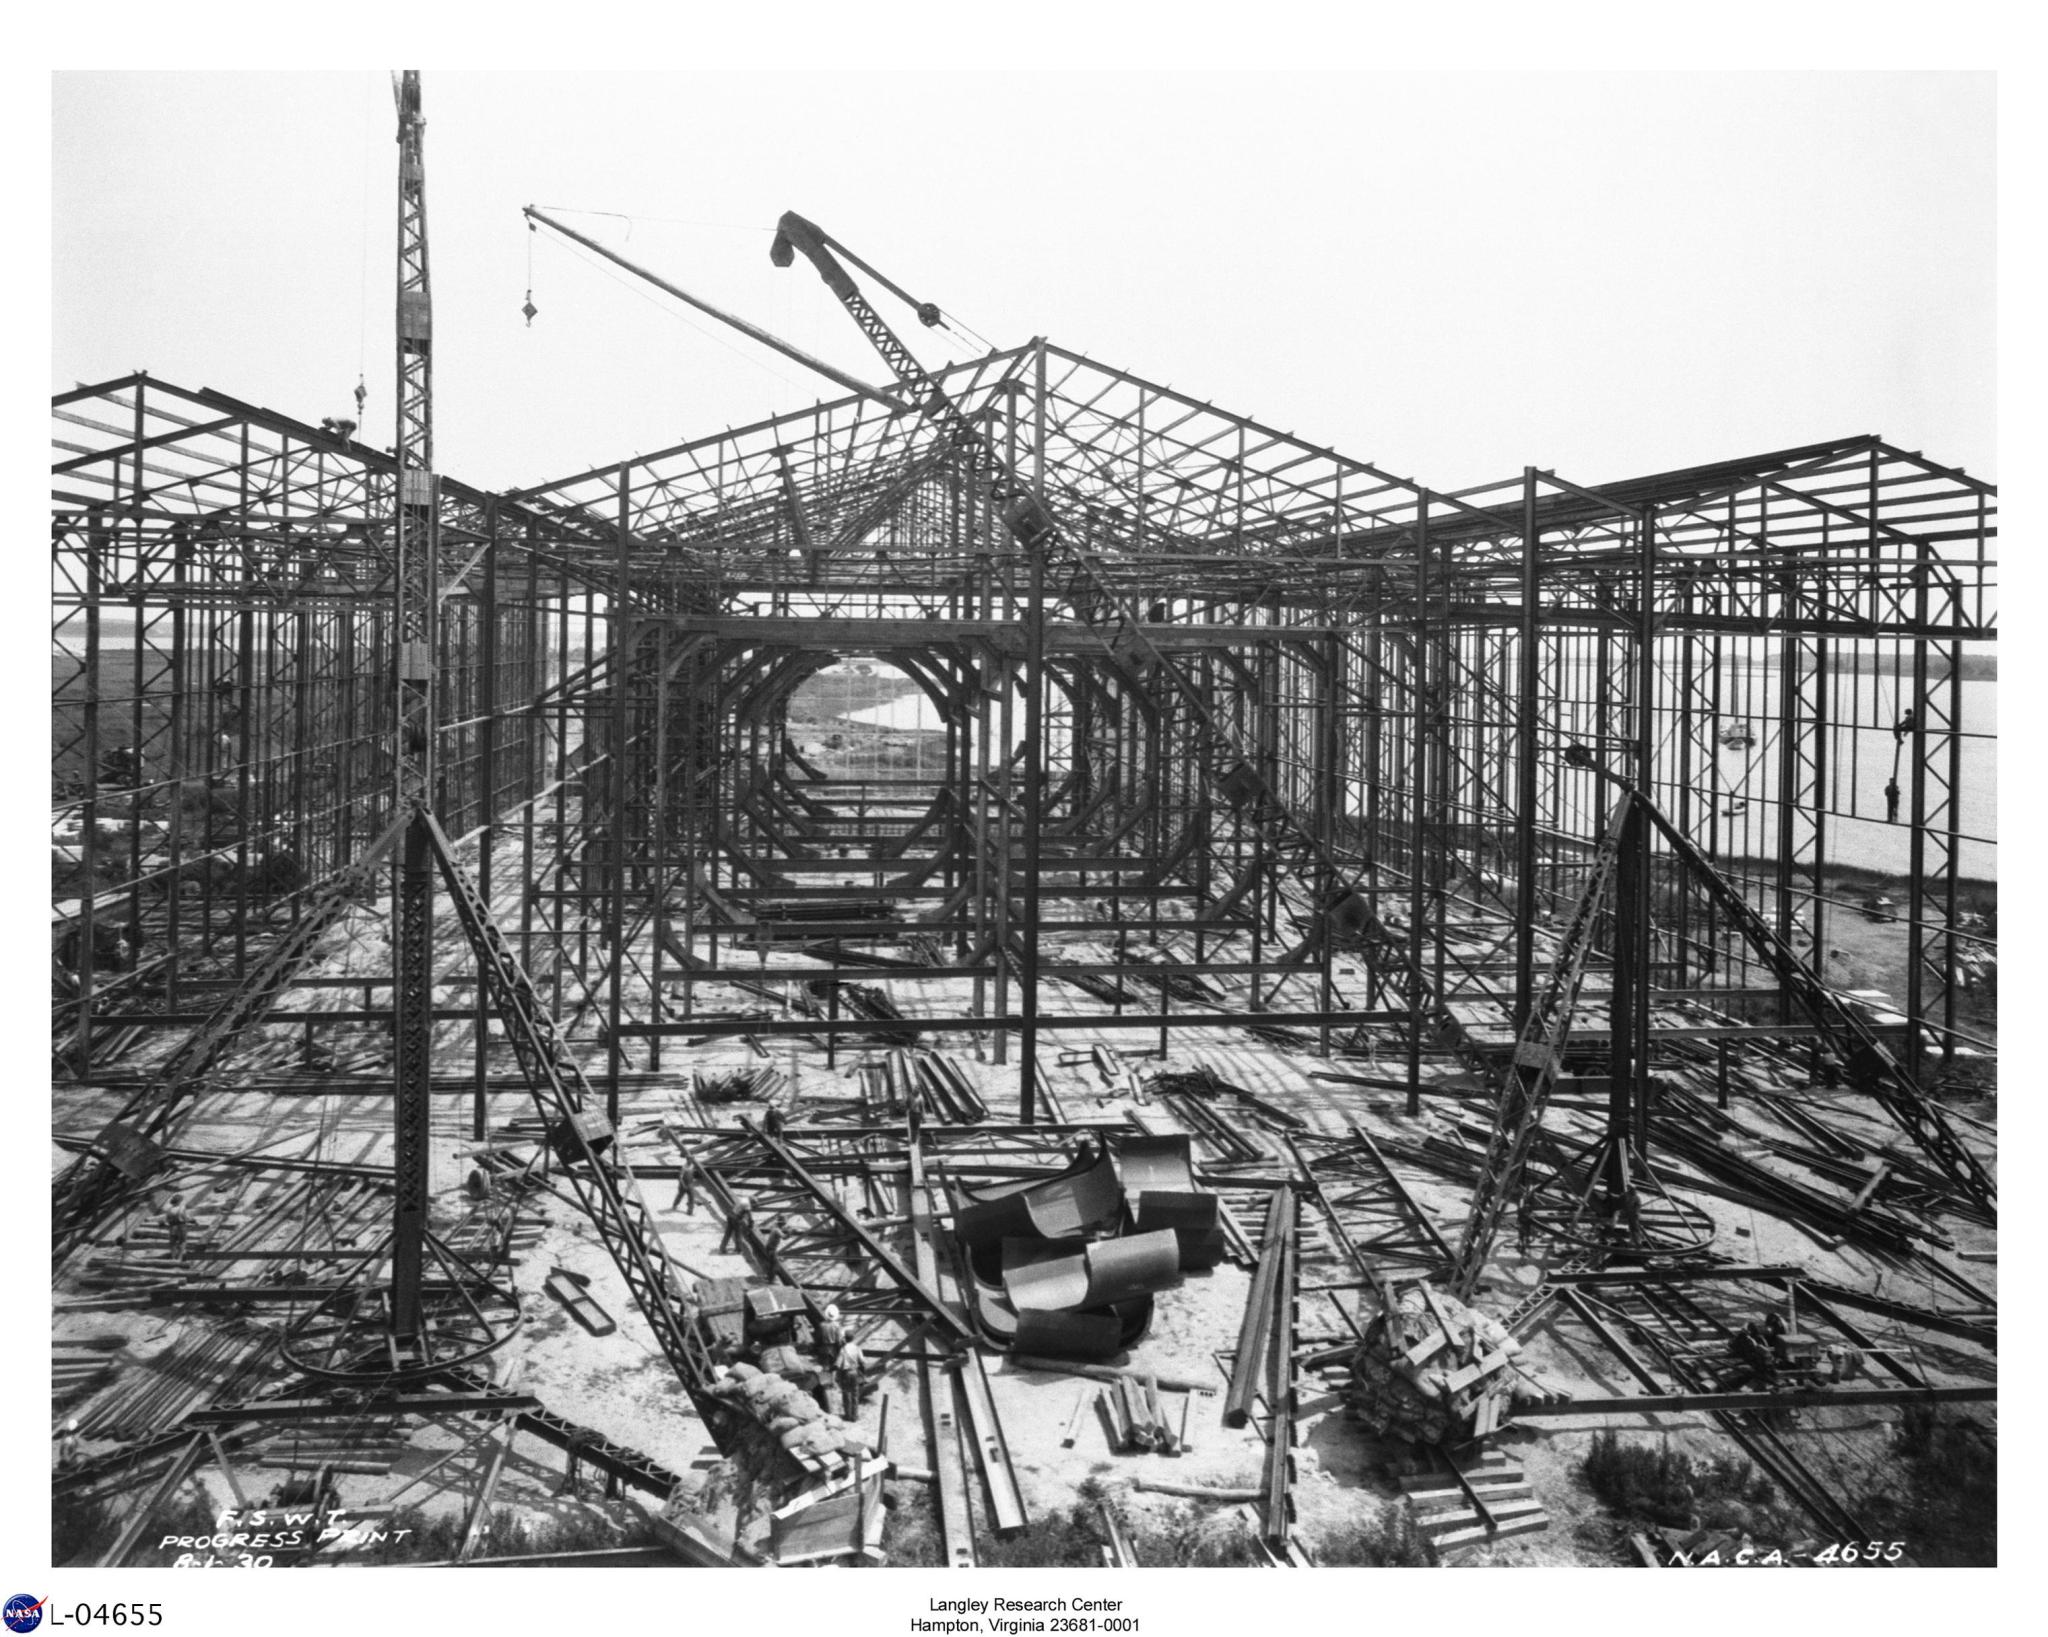 An Aug. 1, 1930, image showing the progression of the construction project’s framing of Building 643 and its Full-Scale Tunnel.